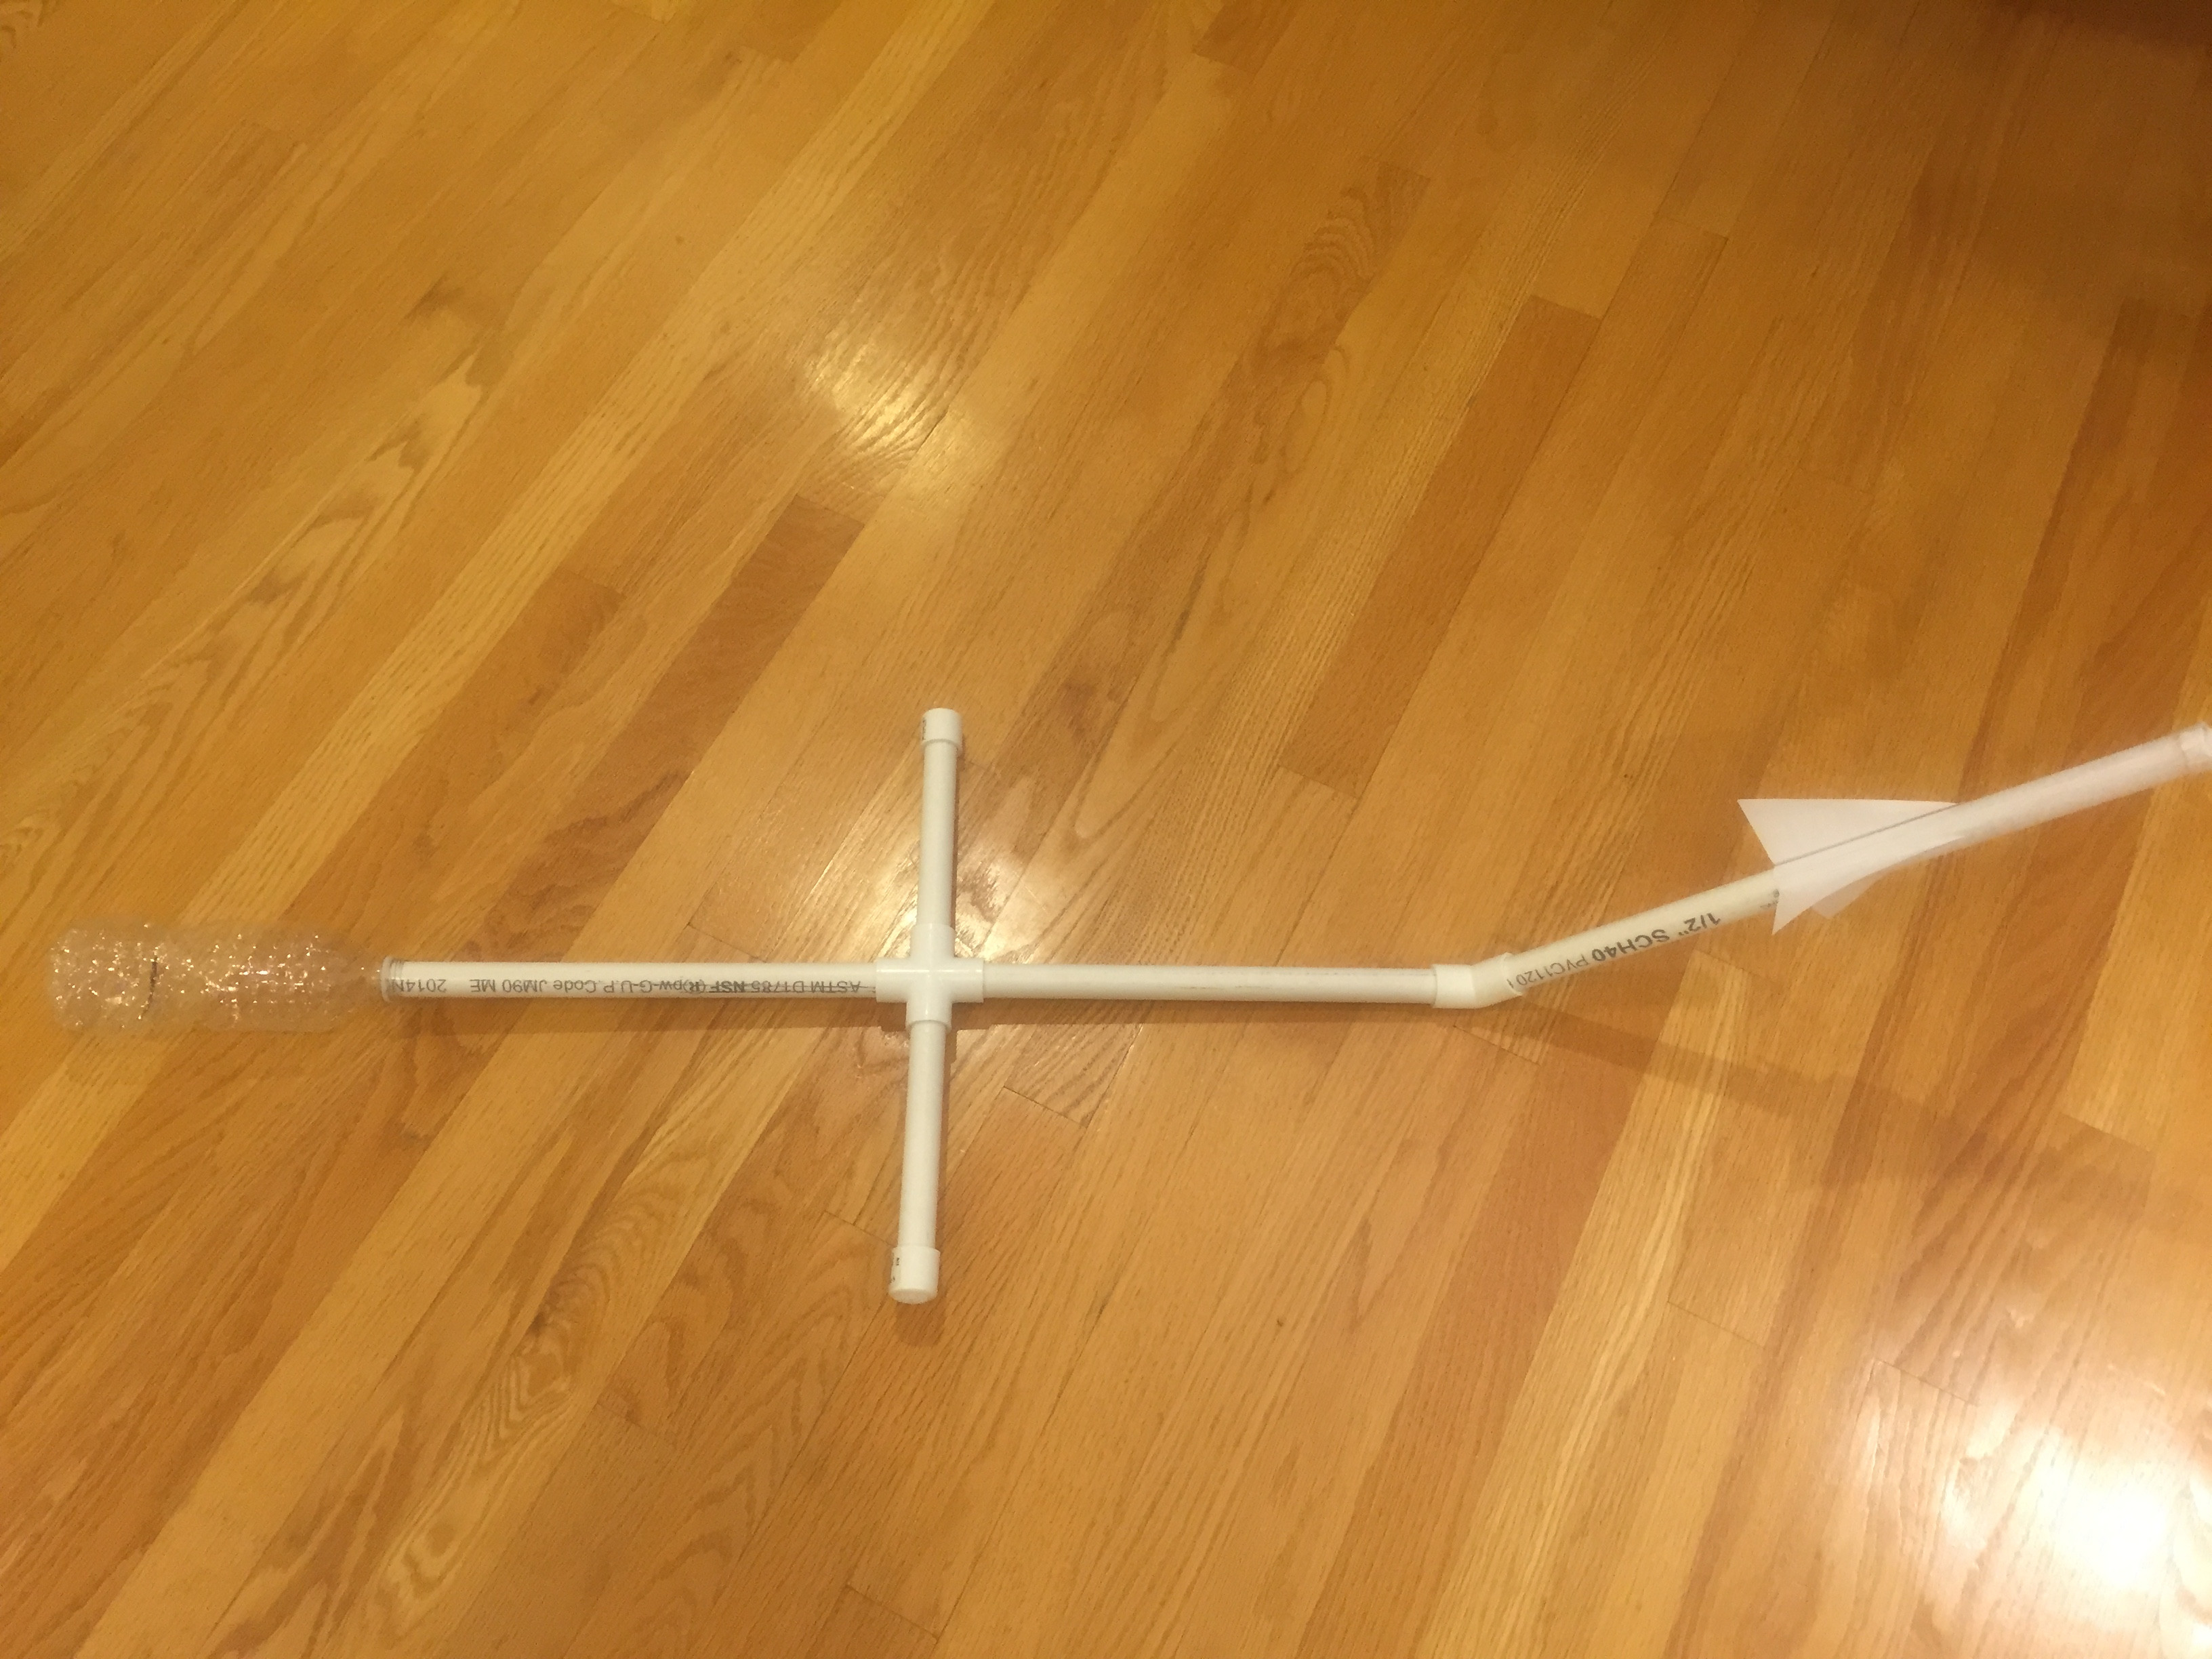 24 Awesome 1 2 Inch Vs 3 4 Inch Hardwood Flooring 2024 free download 1 2 inch vs 3 4 inch hardwood flooring of stomp rockets noggin builders with regard to stomp rocket